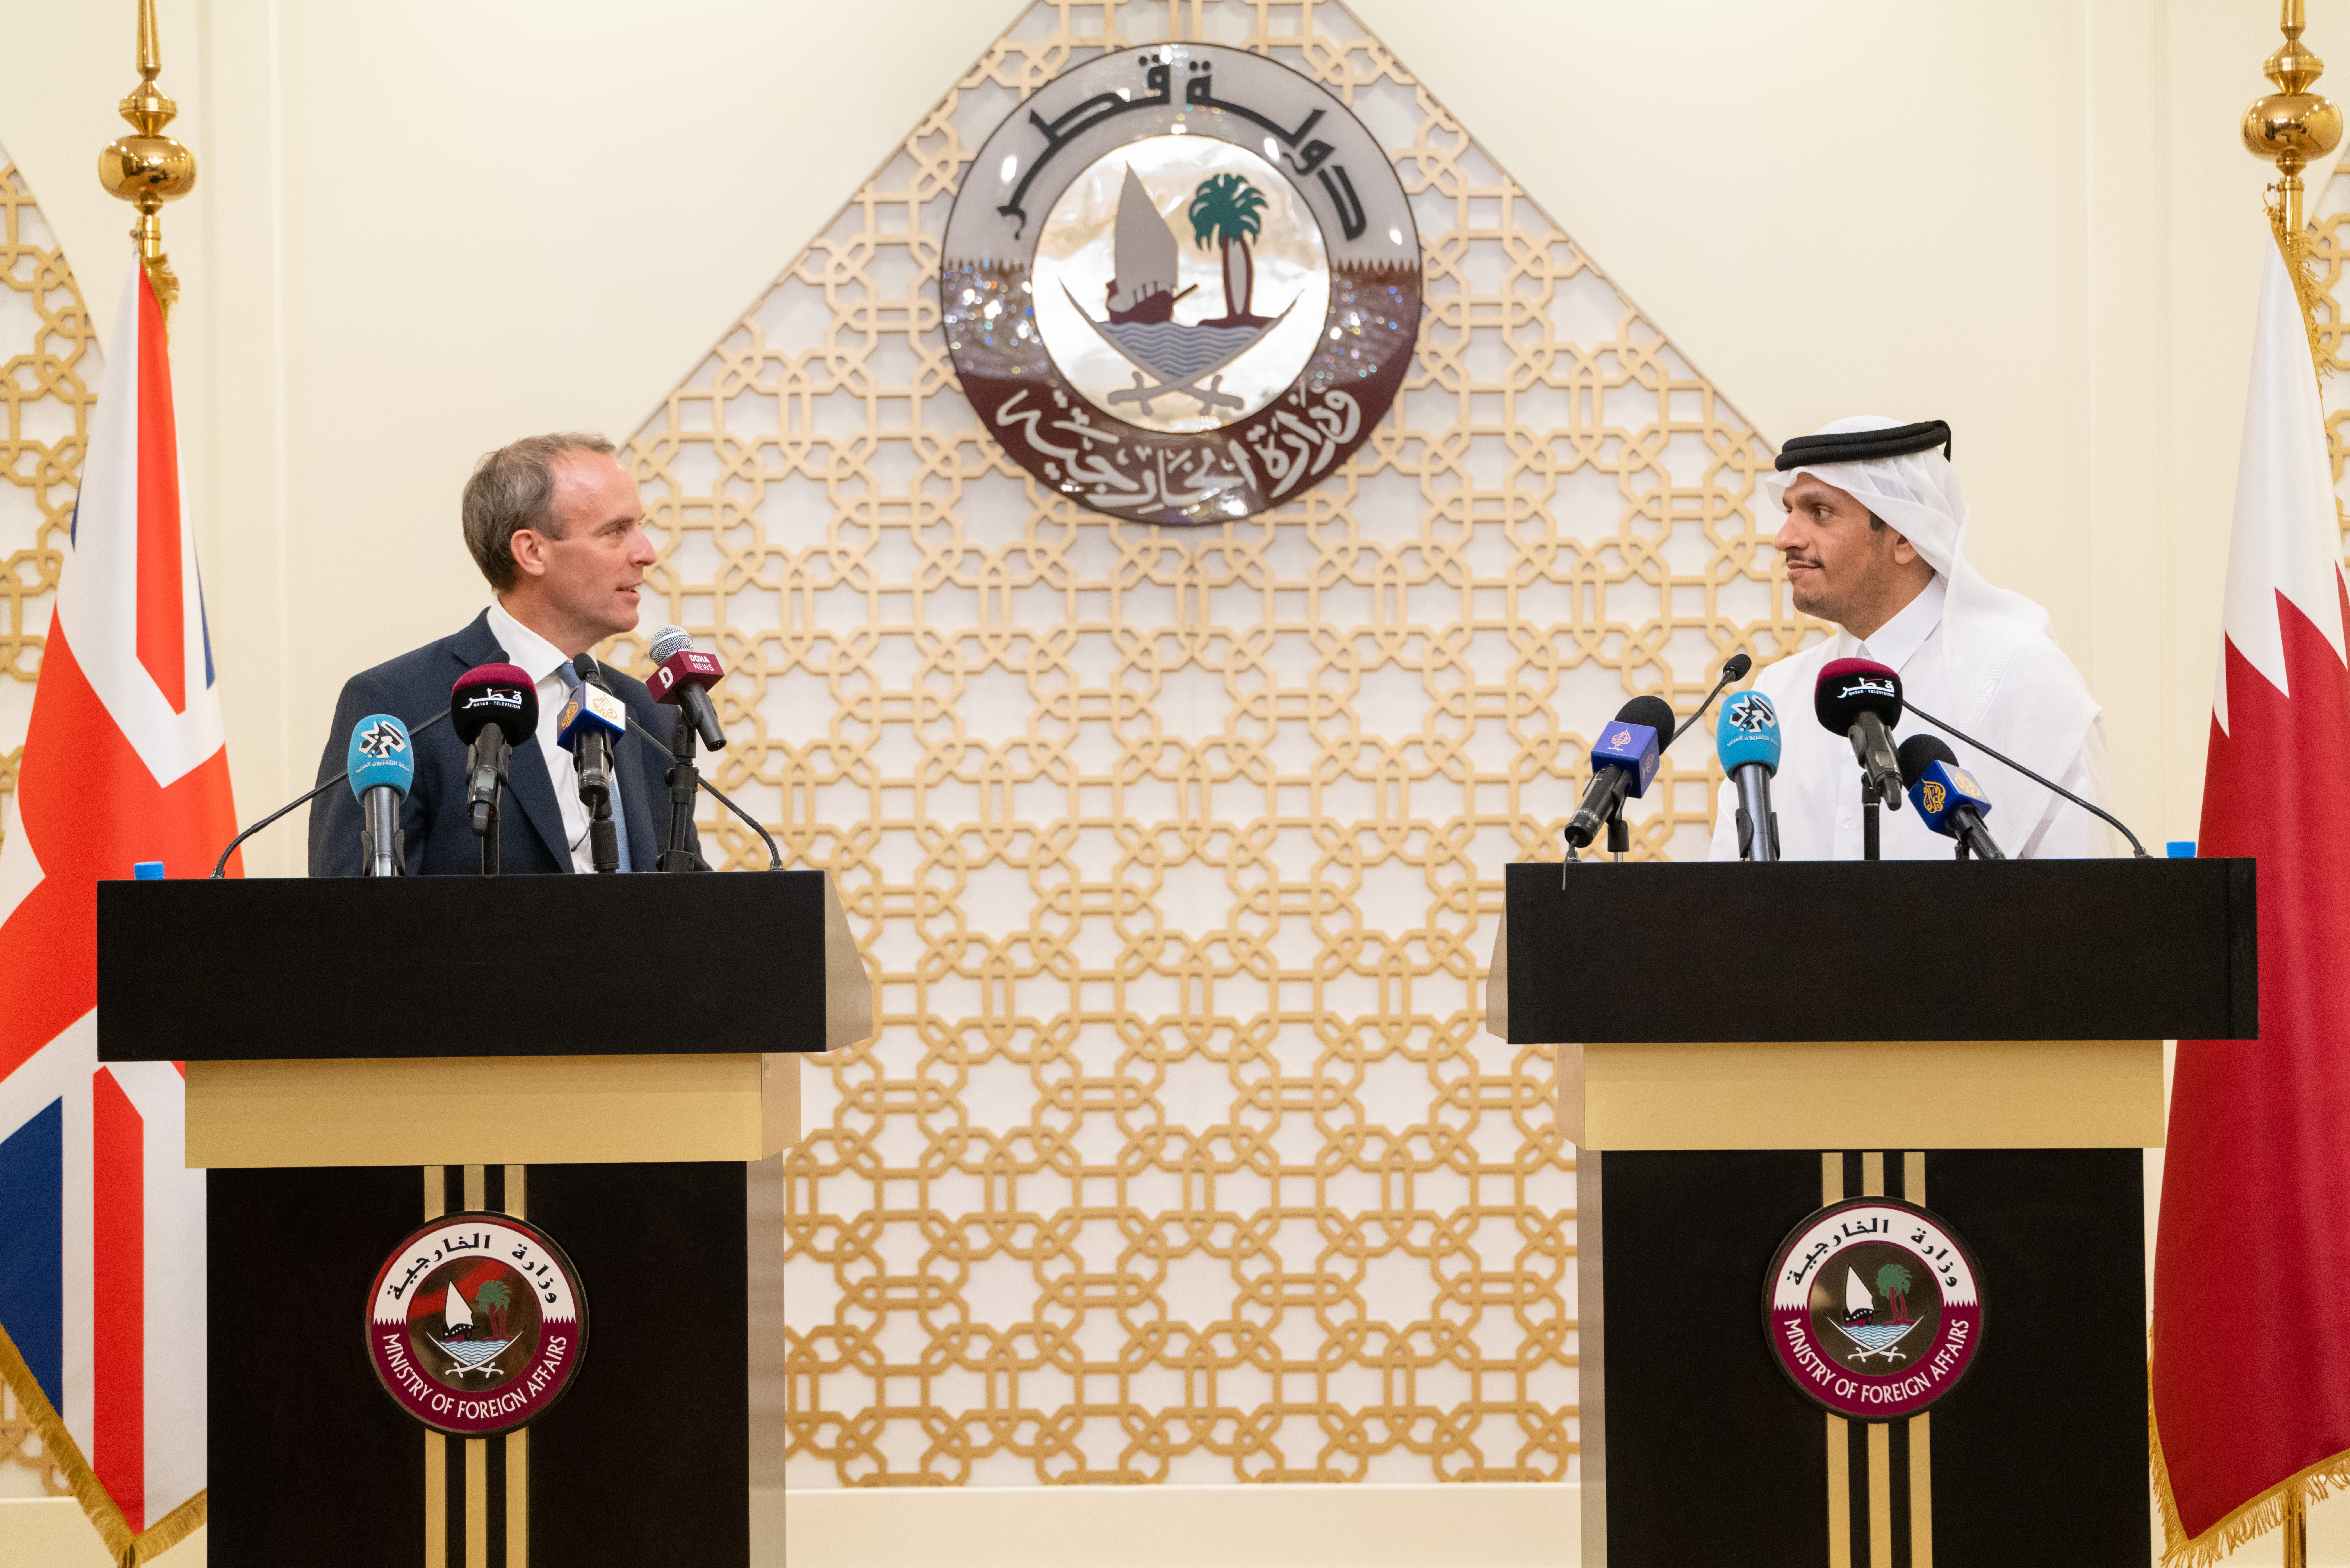 Deputy Prime Minister and Minister of Foreign Affairs Says Qatar Will Continue Efforts as Impartial Mediator to Enhance Agreement on Afghanistan